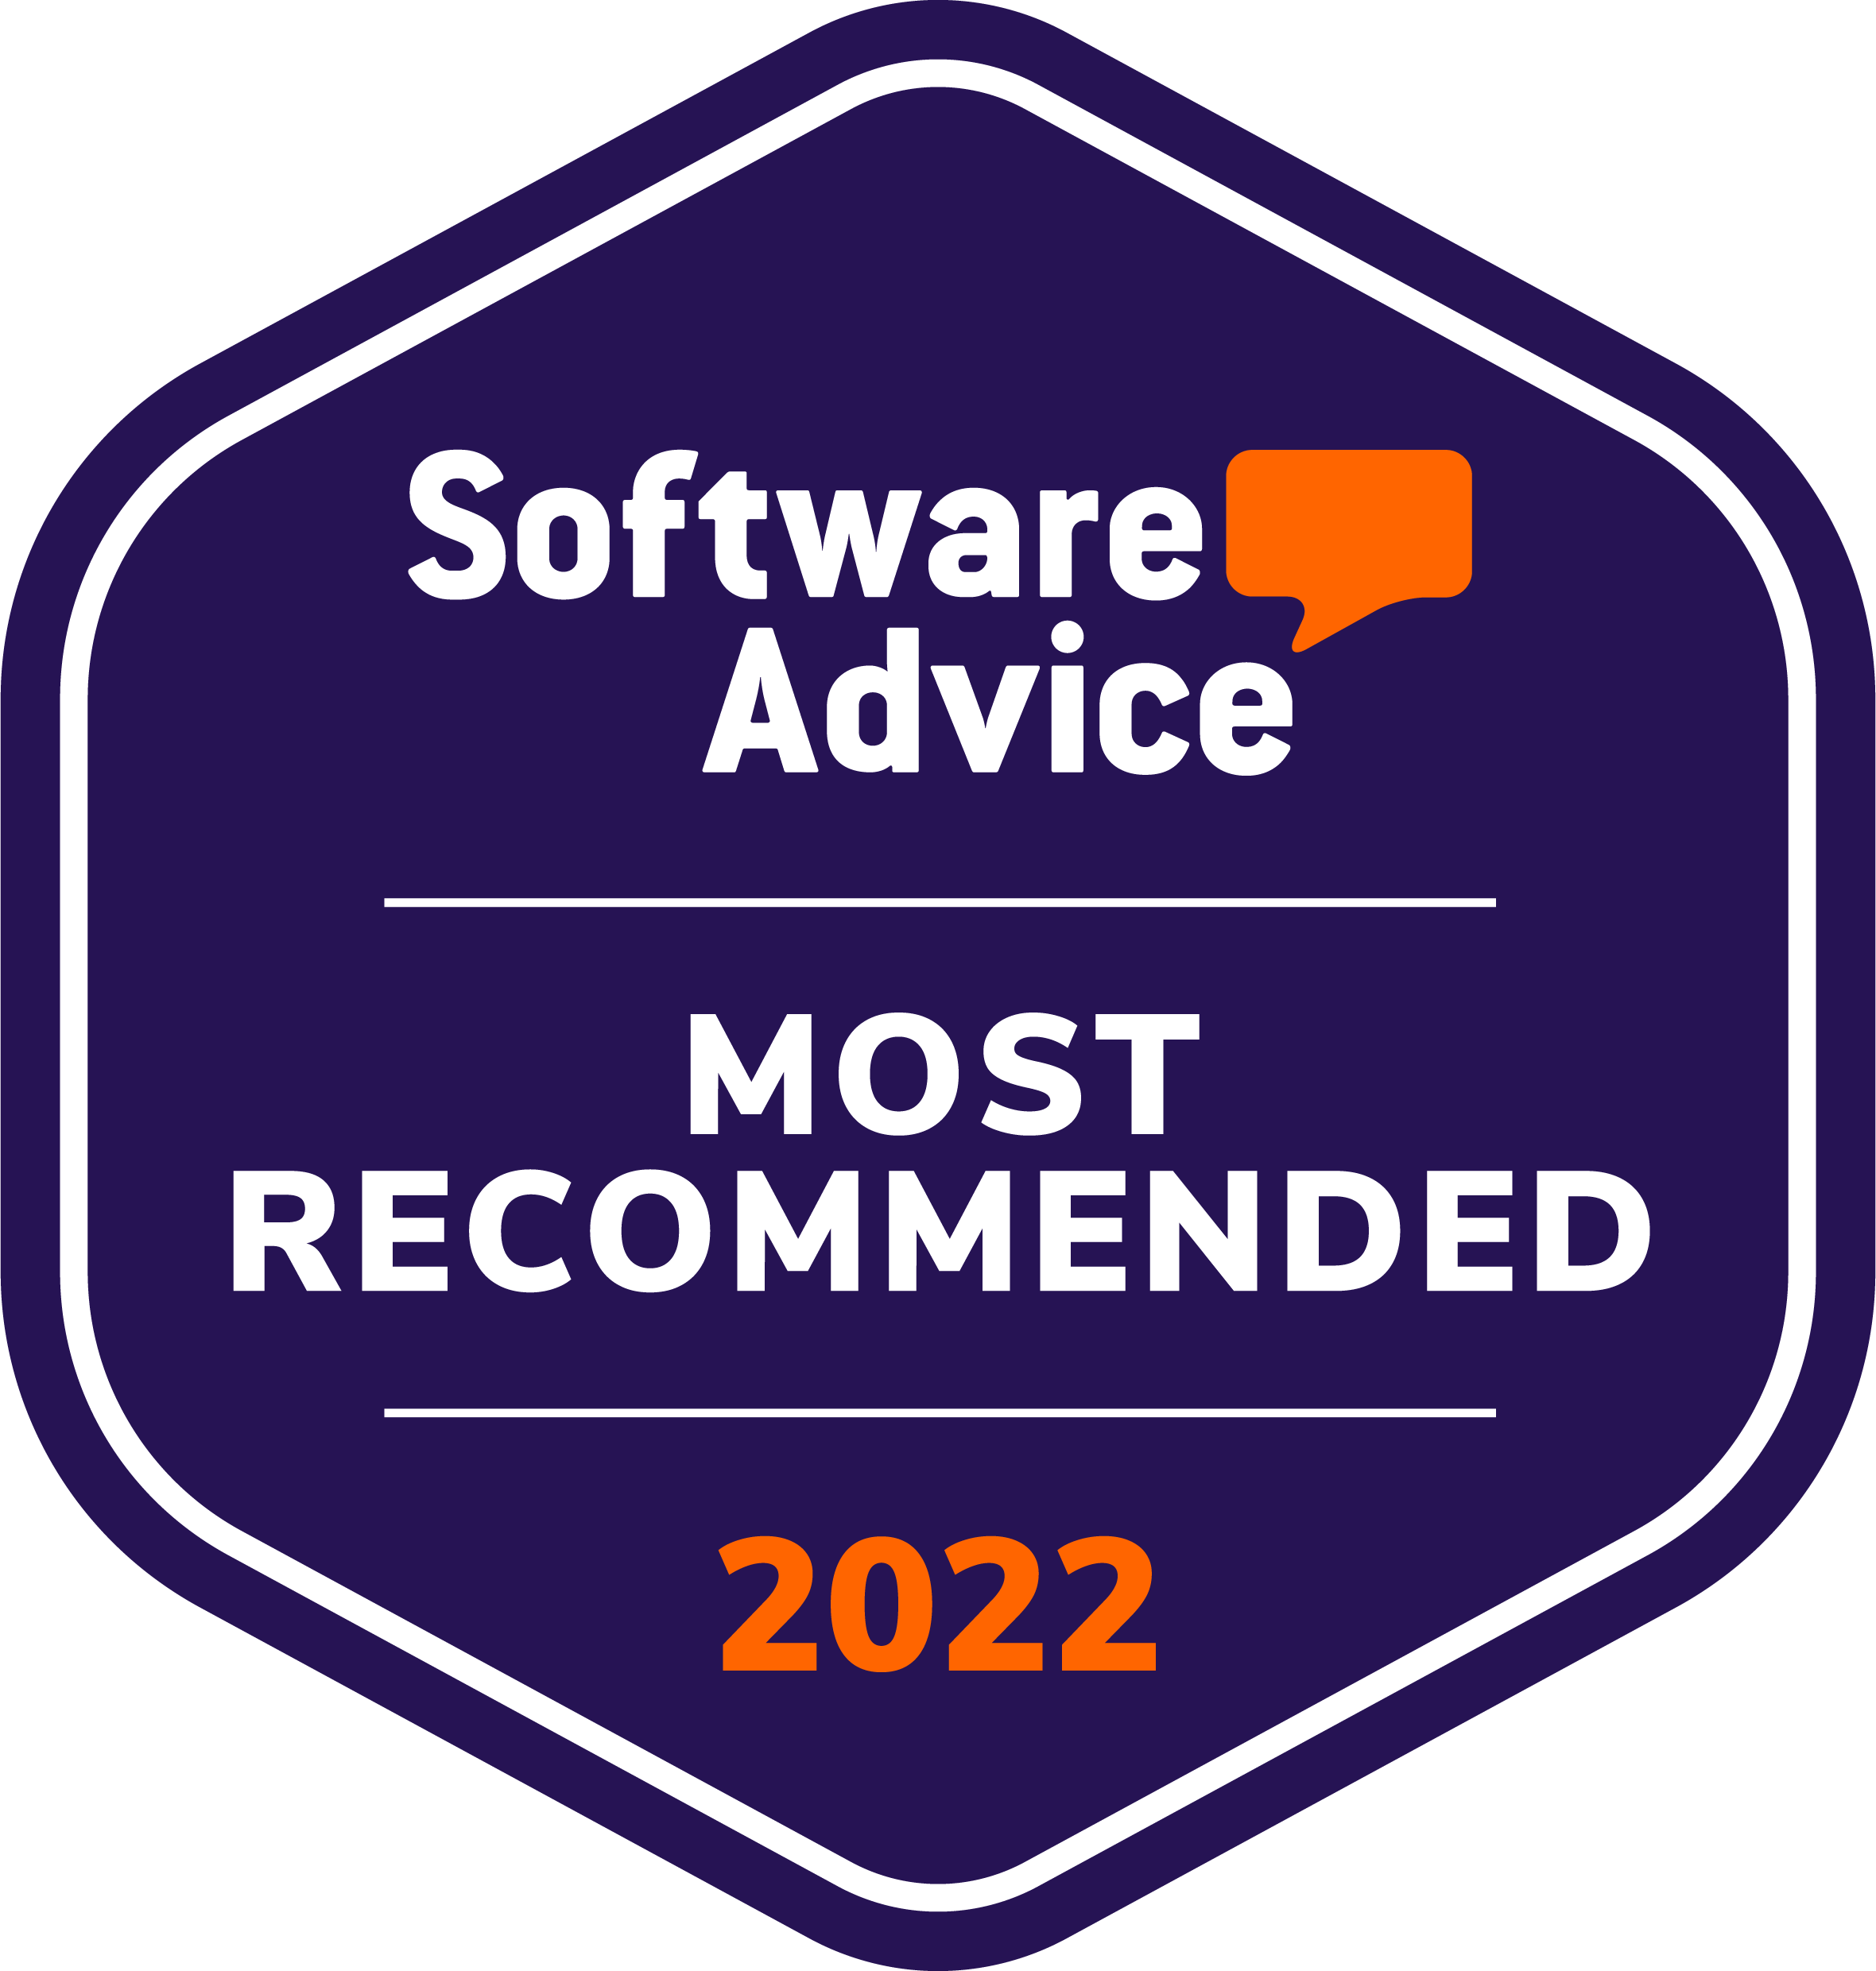 Acumatica Software Advice Most Recommended 2022